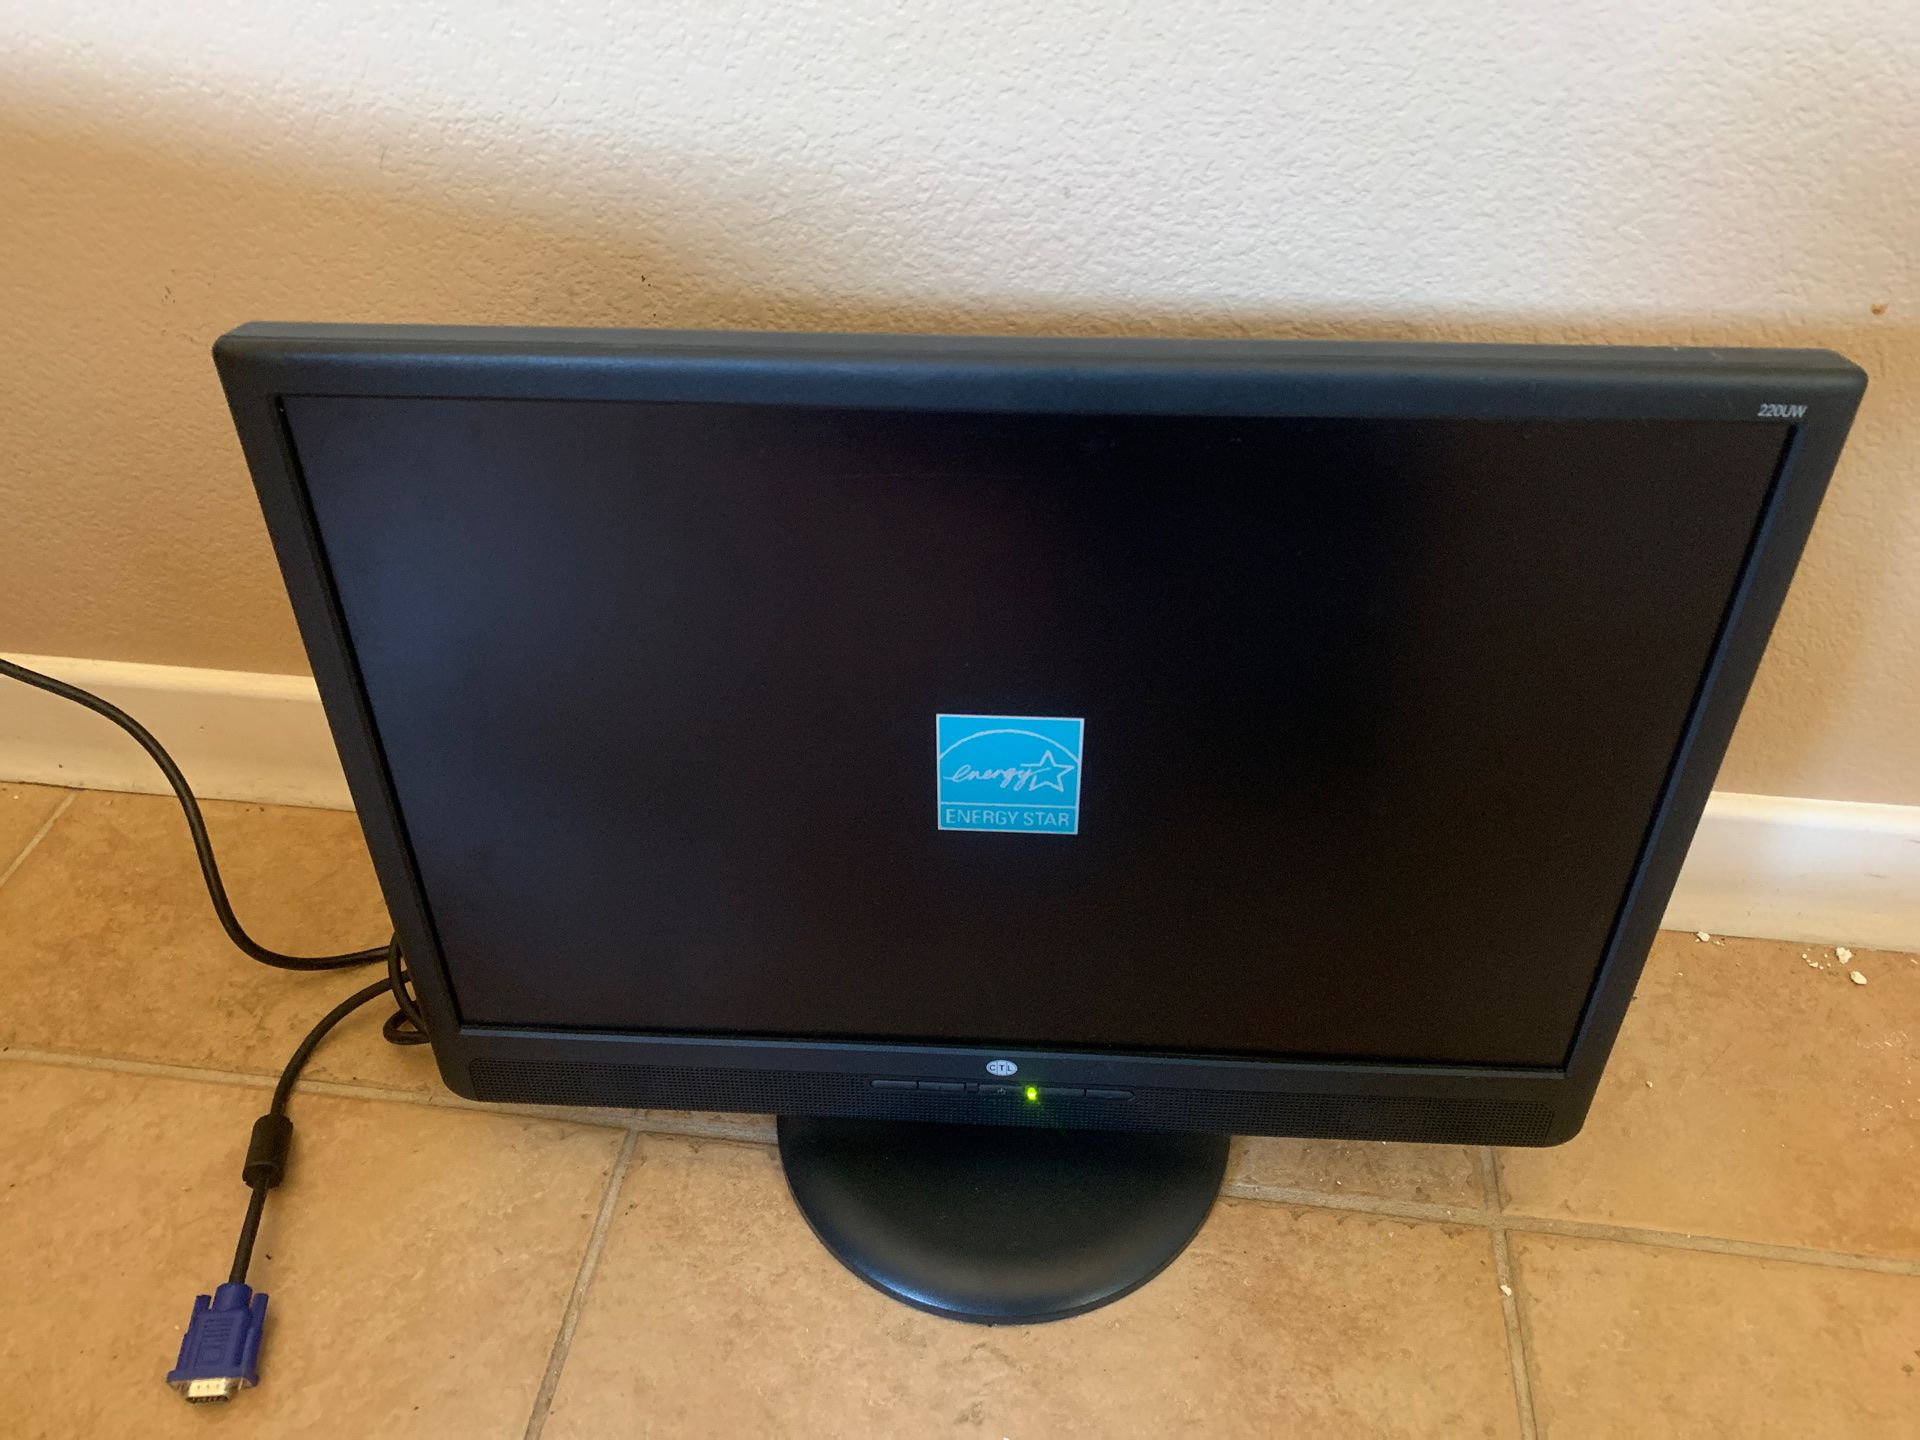 CTL (Computer Technology Link) 22” HD LCD monitor